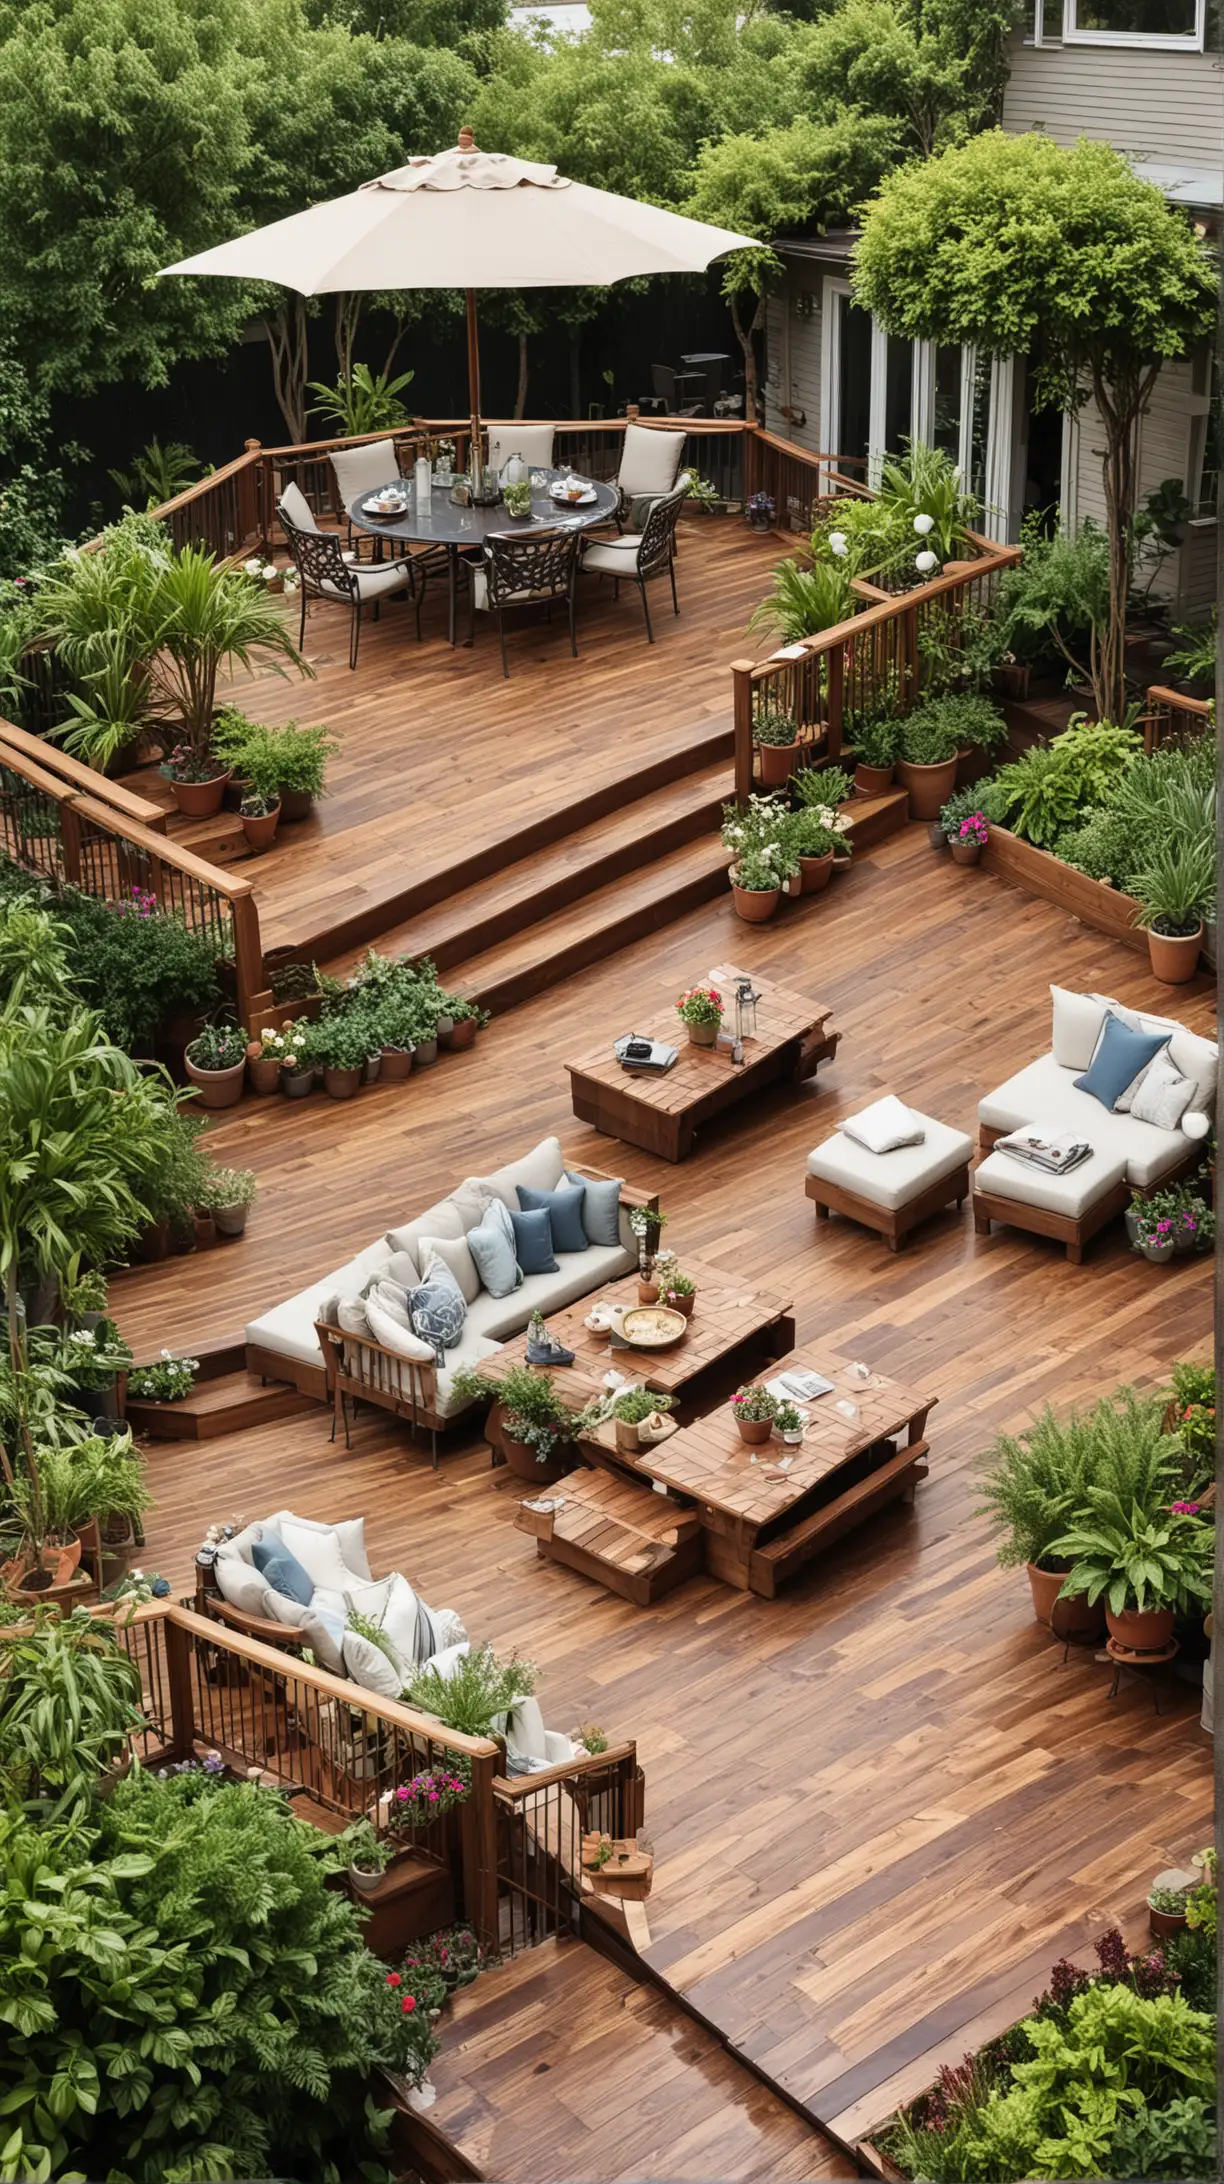 An elegant multilevel wooden deck with distinct dining and lounging areas, decorated with outdoor furniture and potted plants, set in a lush garden.